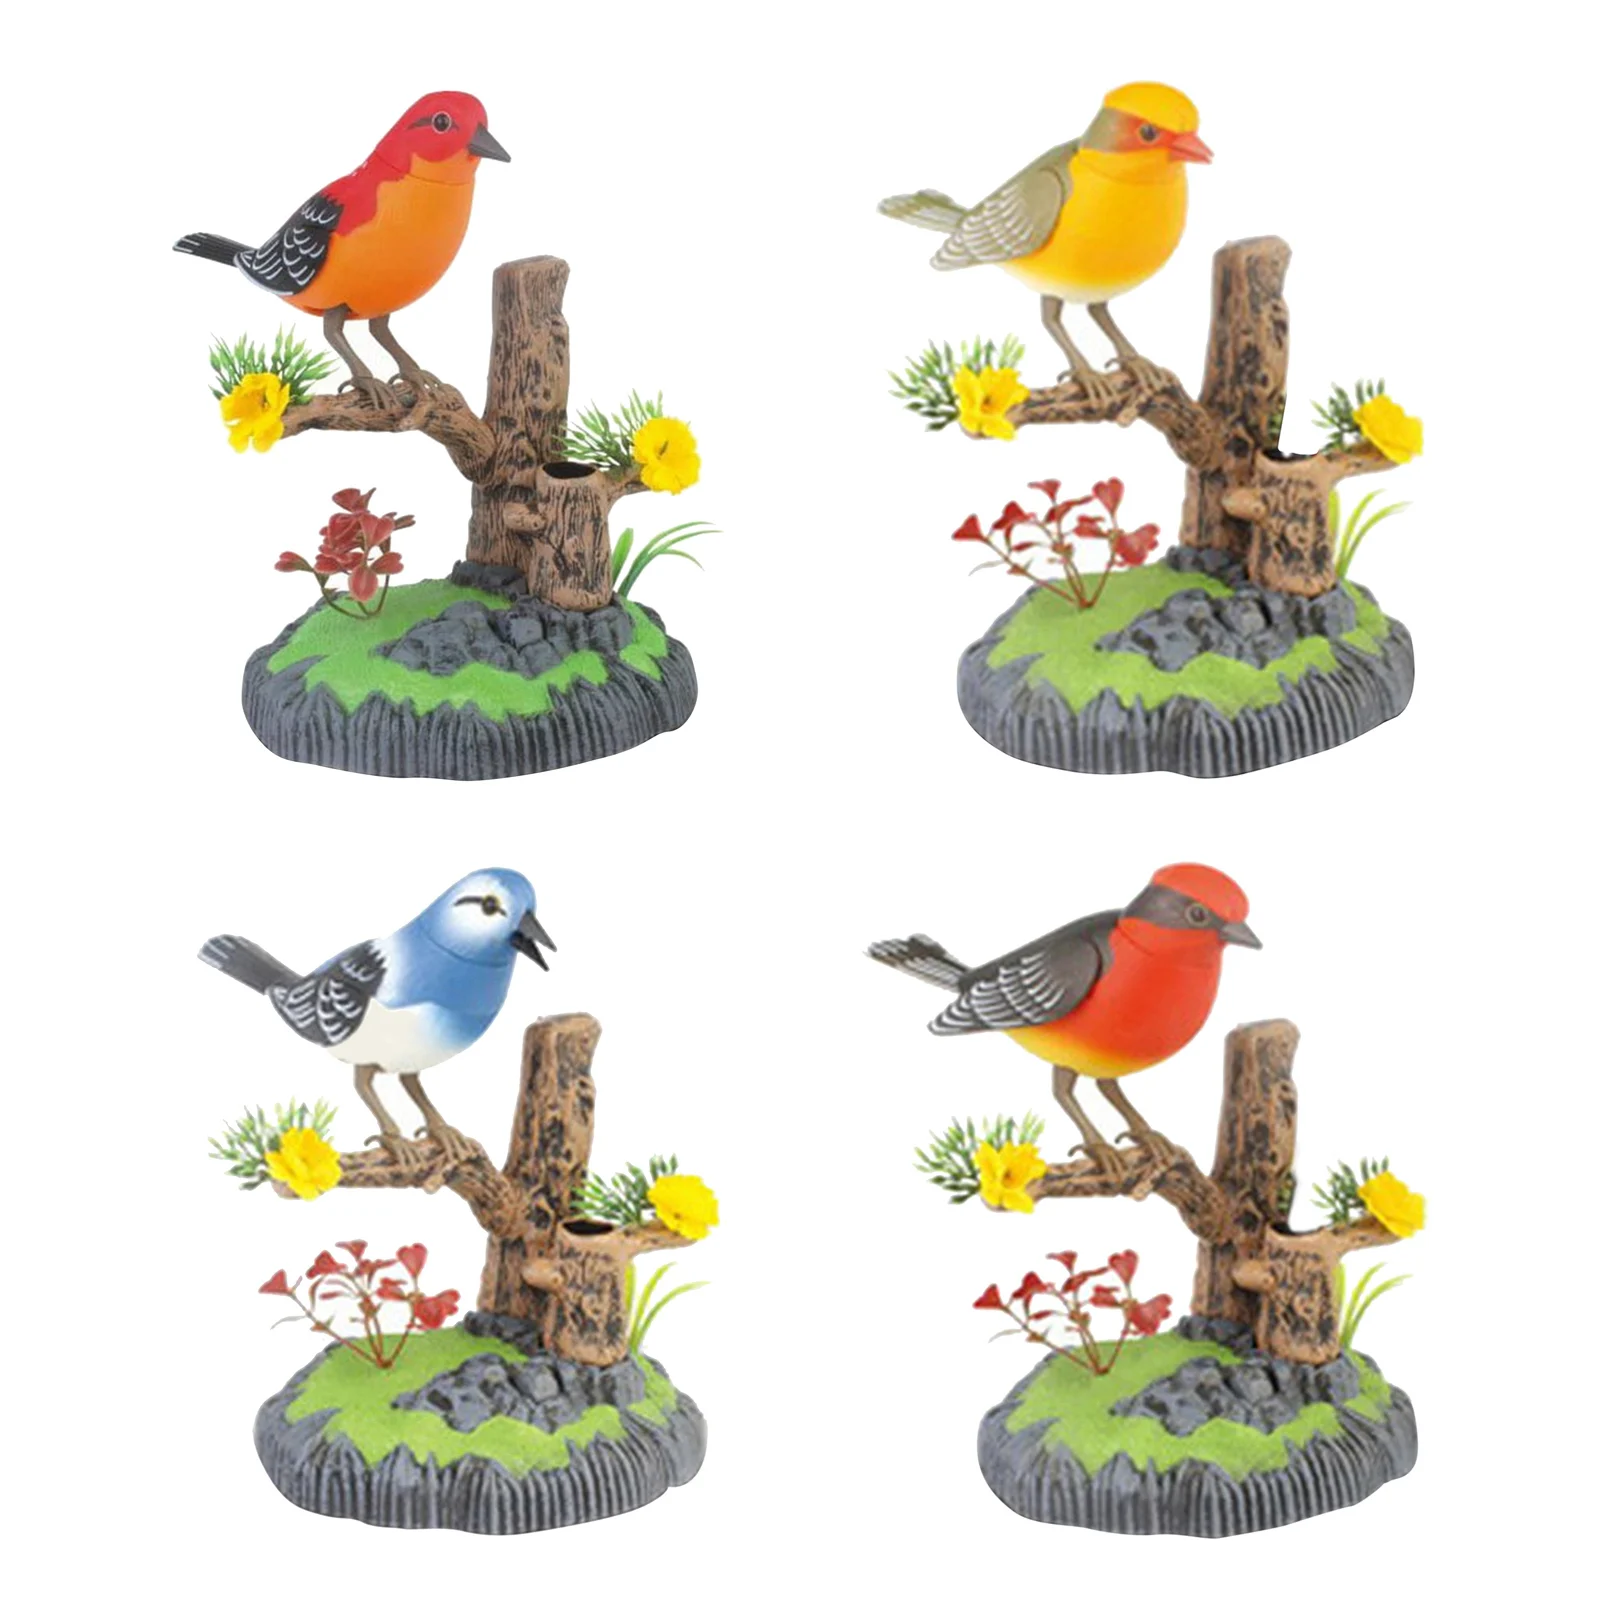 Cute Electronic Talking Bird Toys Moving And Sound Record Speaking Parrot Talking Toys Children Gift for Chirends or Decorate